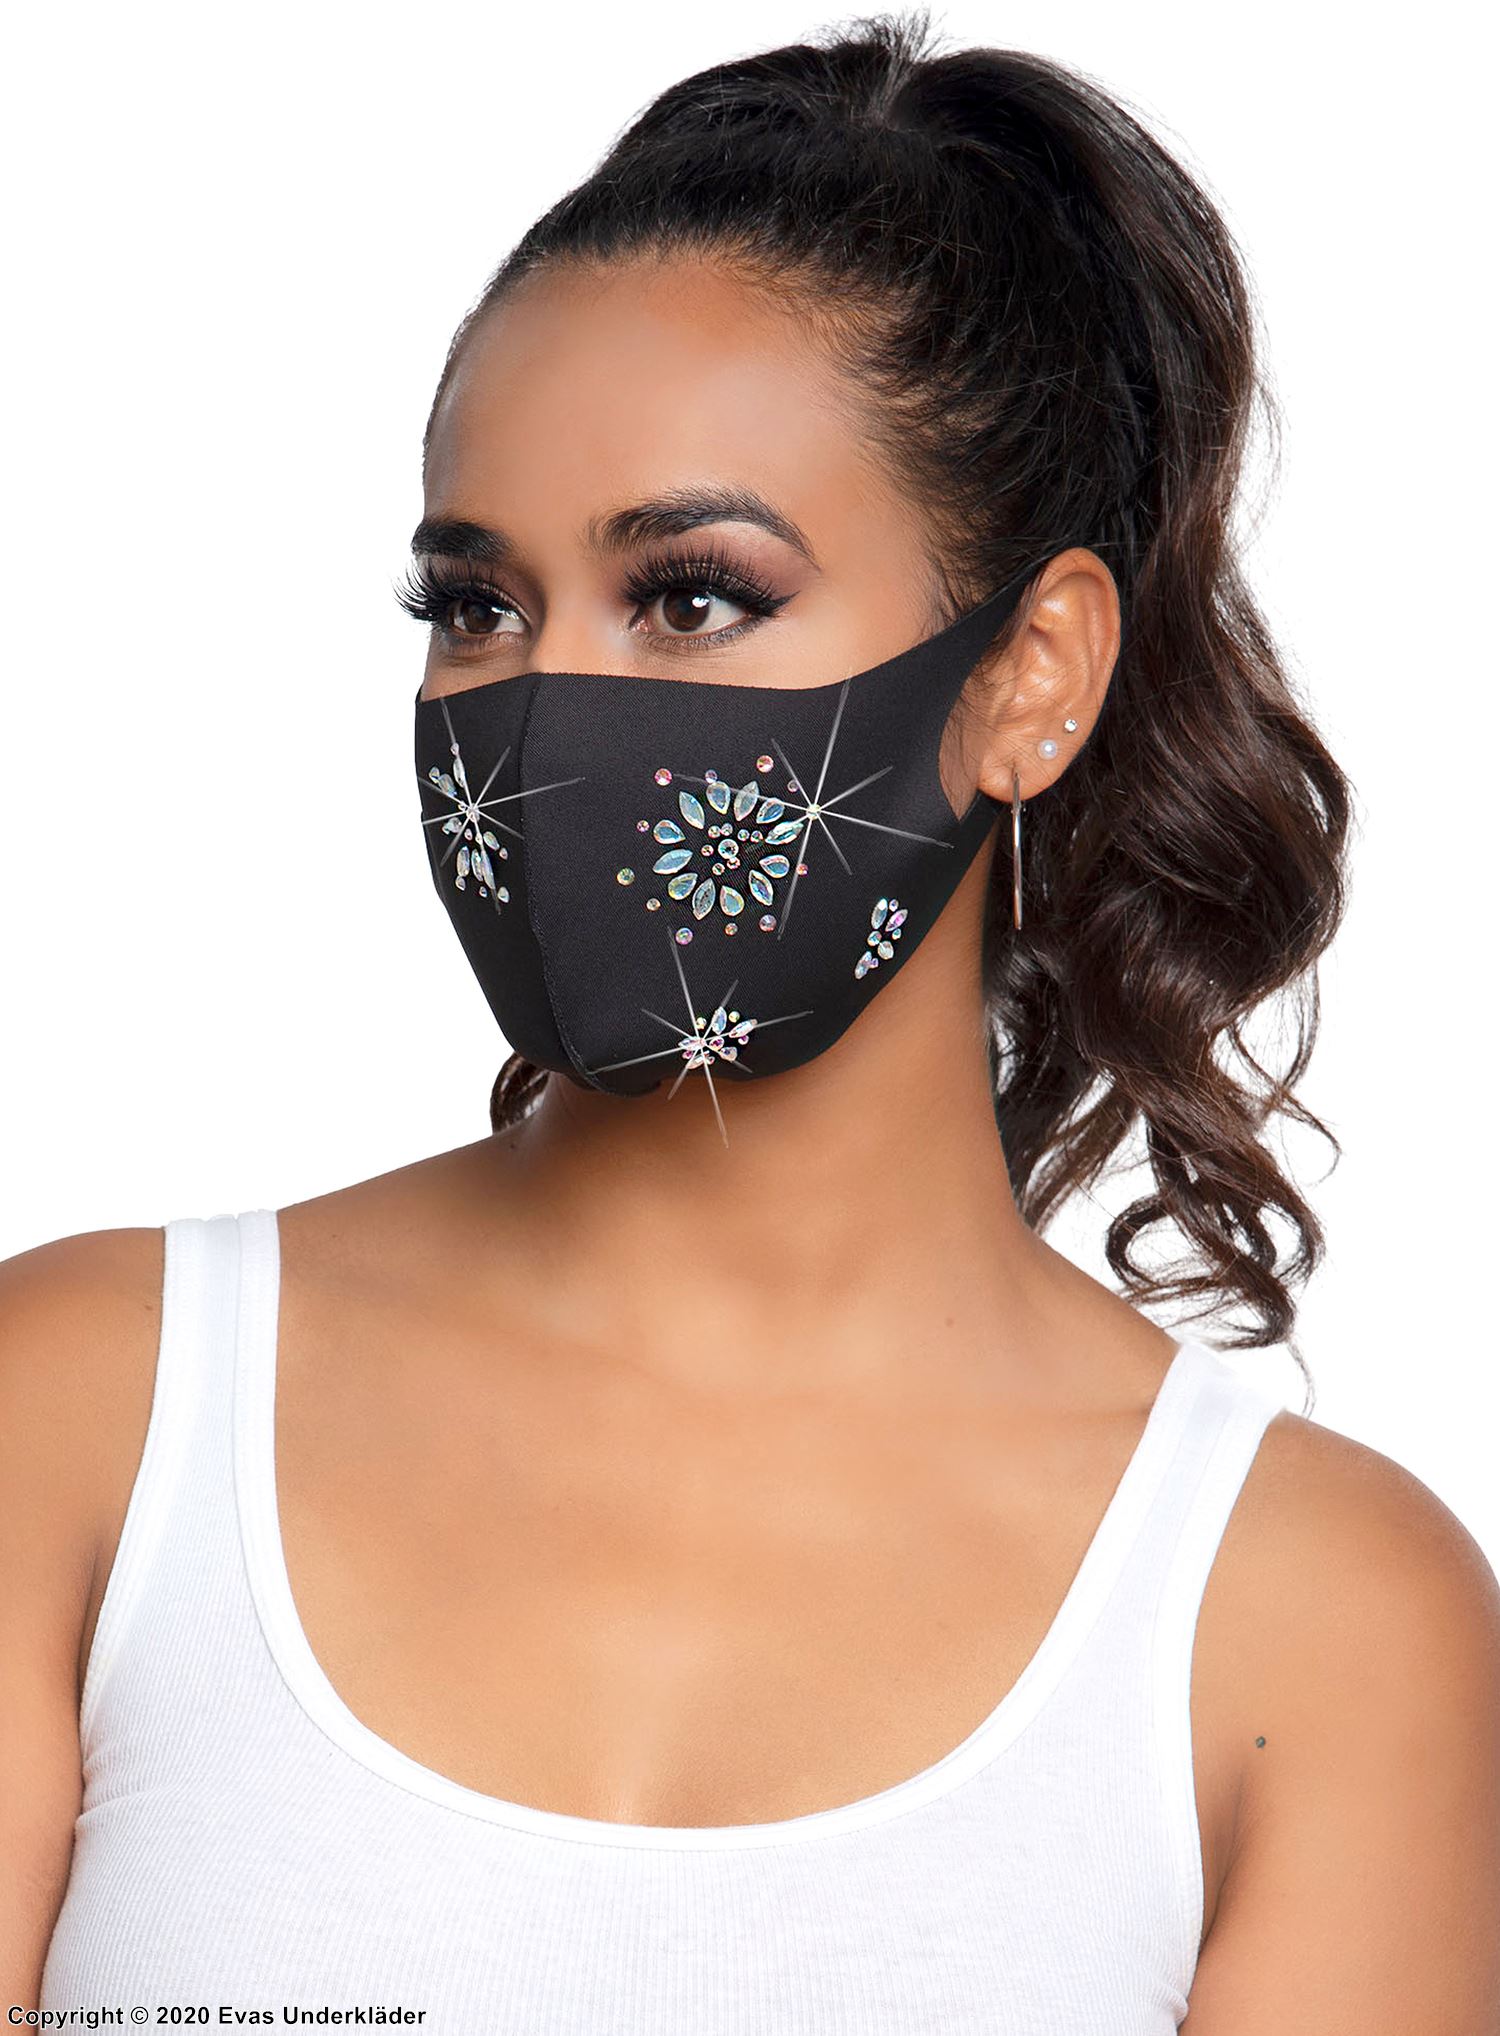 Fashion face mask / mouth cover, rhinestone flowers